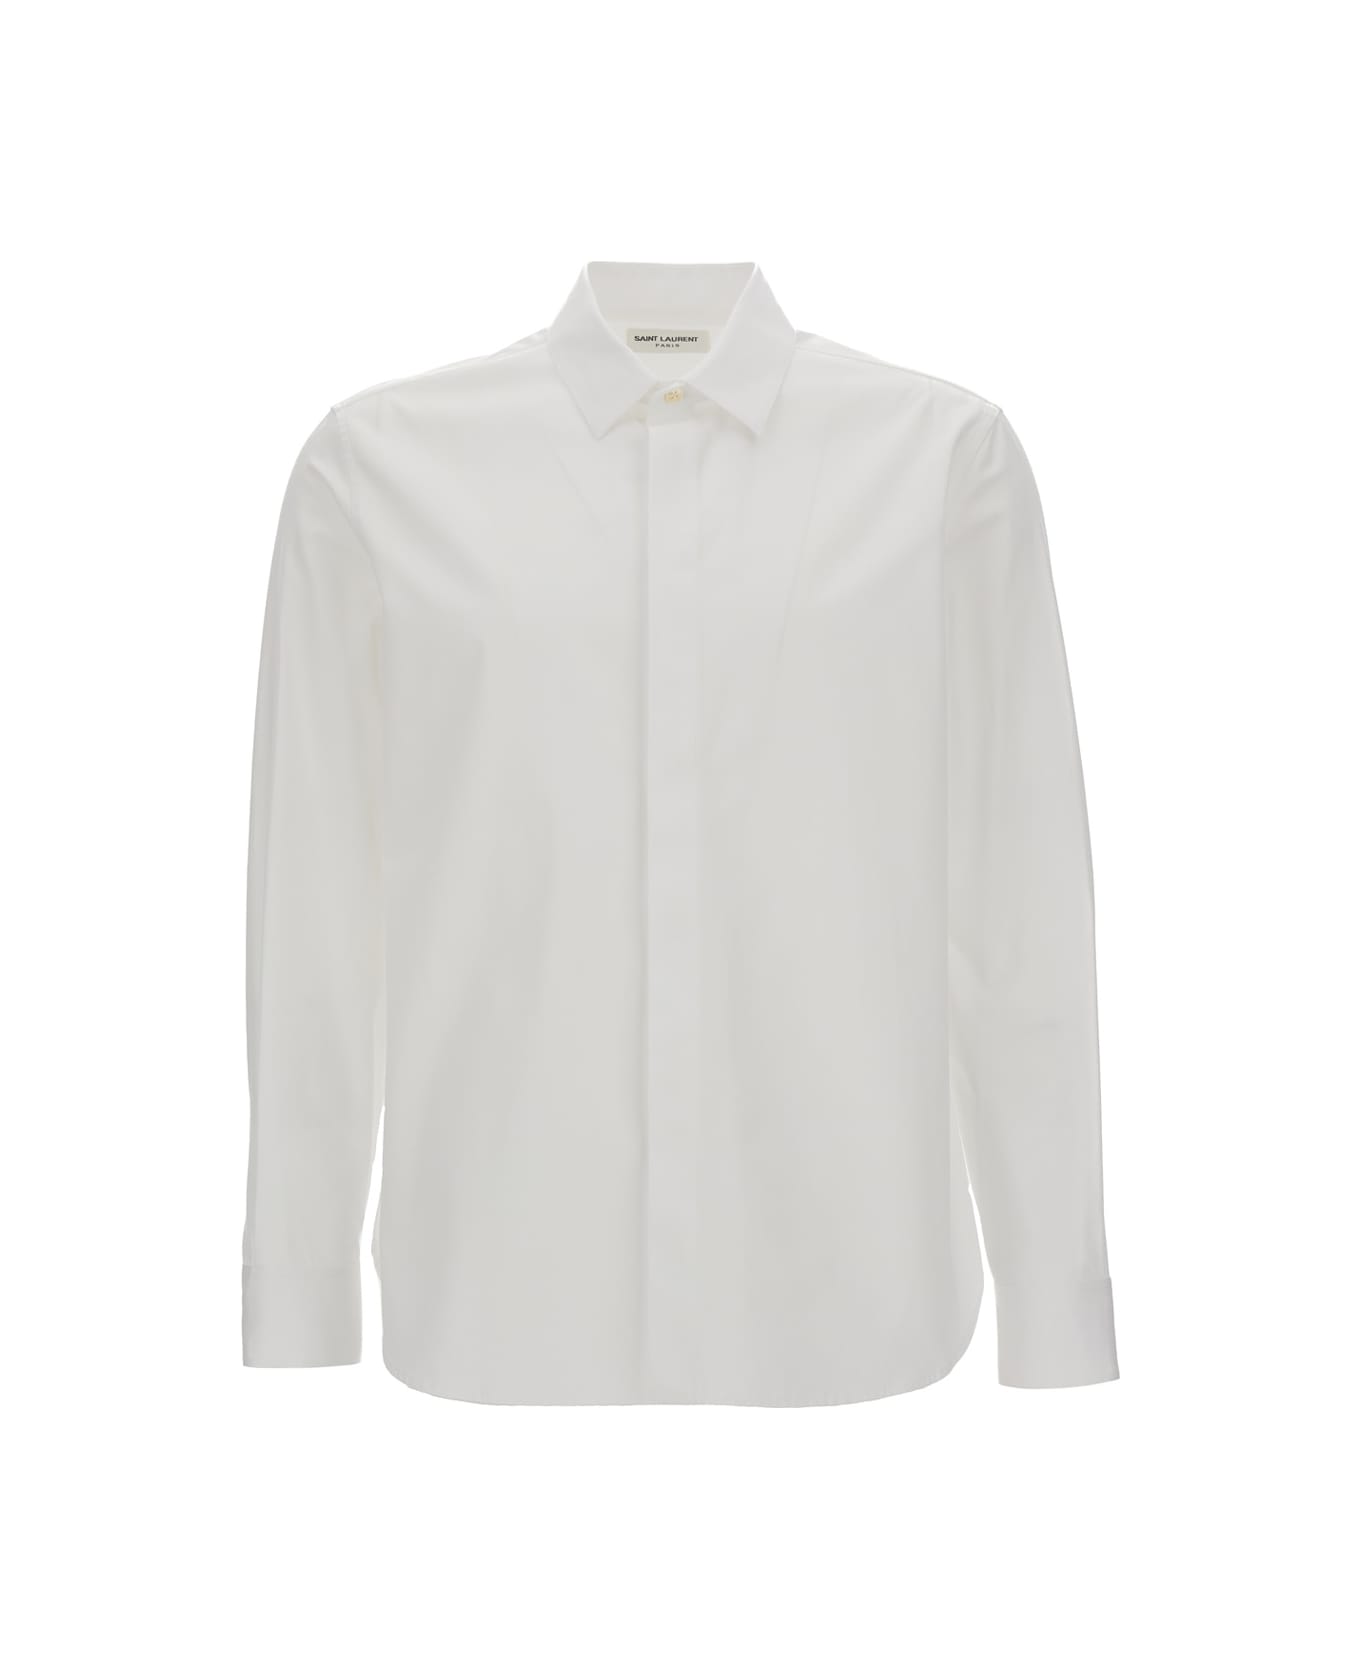 Saint Laurent White Pointed Collar Long Sleeve Shirt In Cotton Man - White シャツ